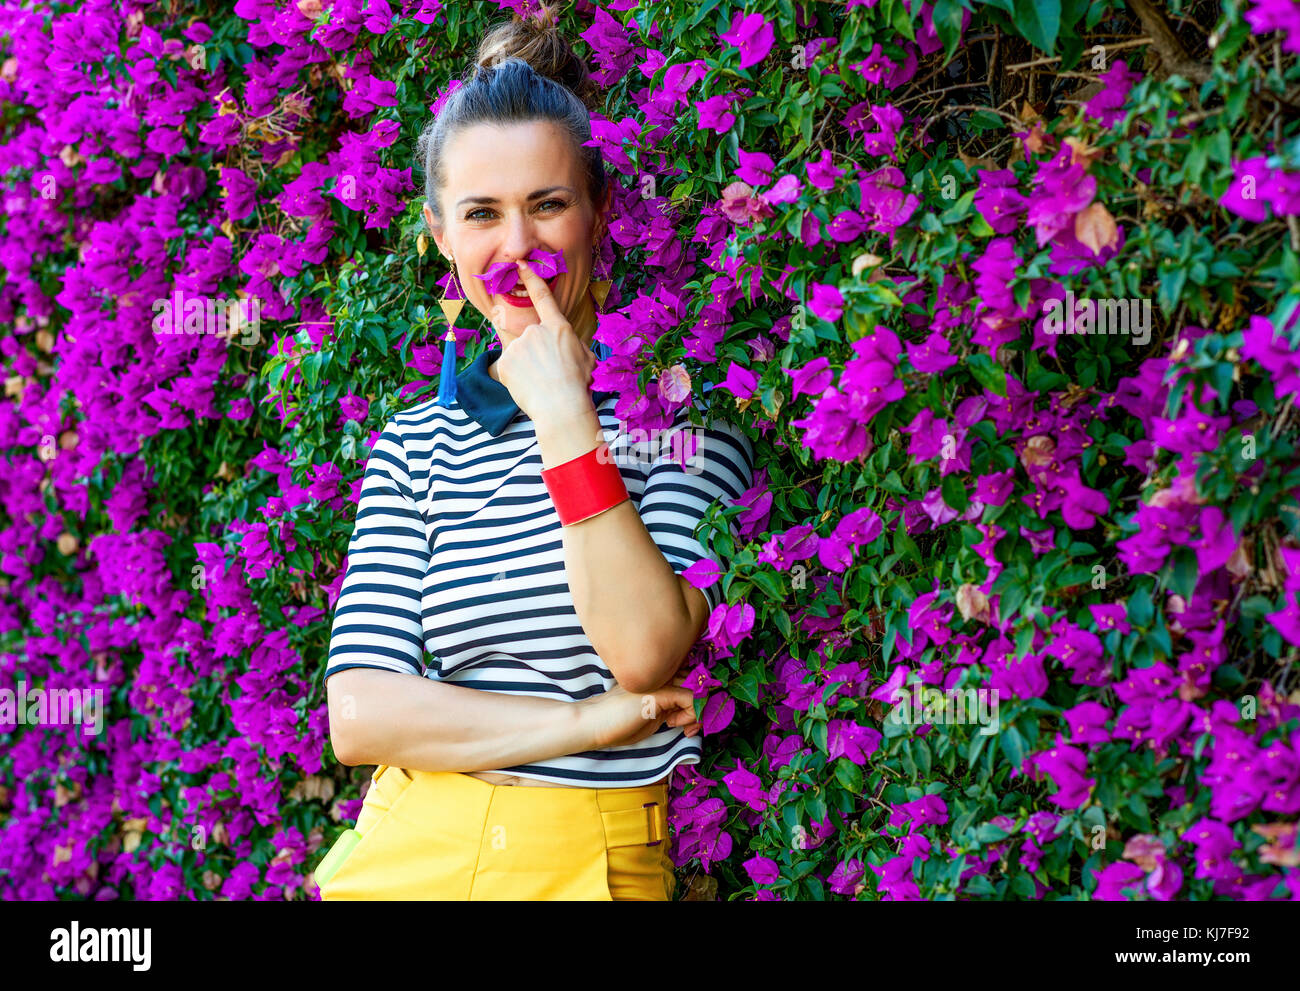 Colorful Freshness. smiling trendy woman in yellow shorts and stripy shirt in the front of colorful magenta flowers bed having fun time Stock Photo